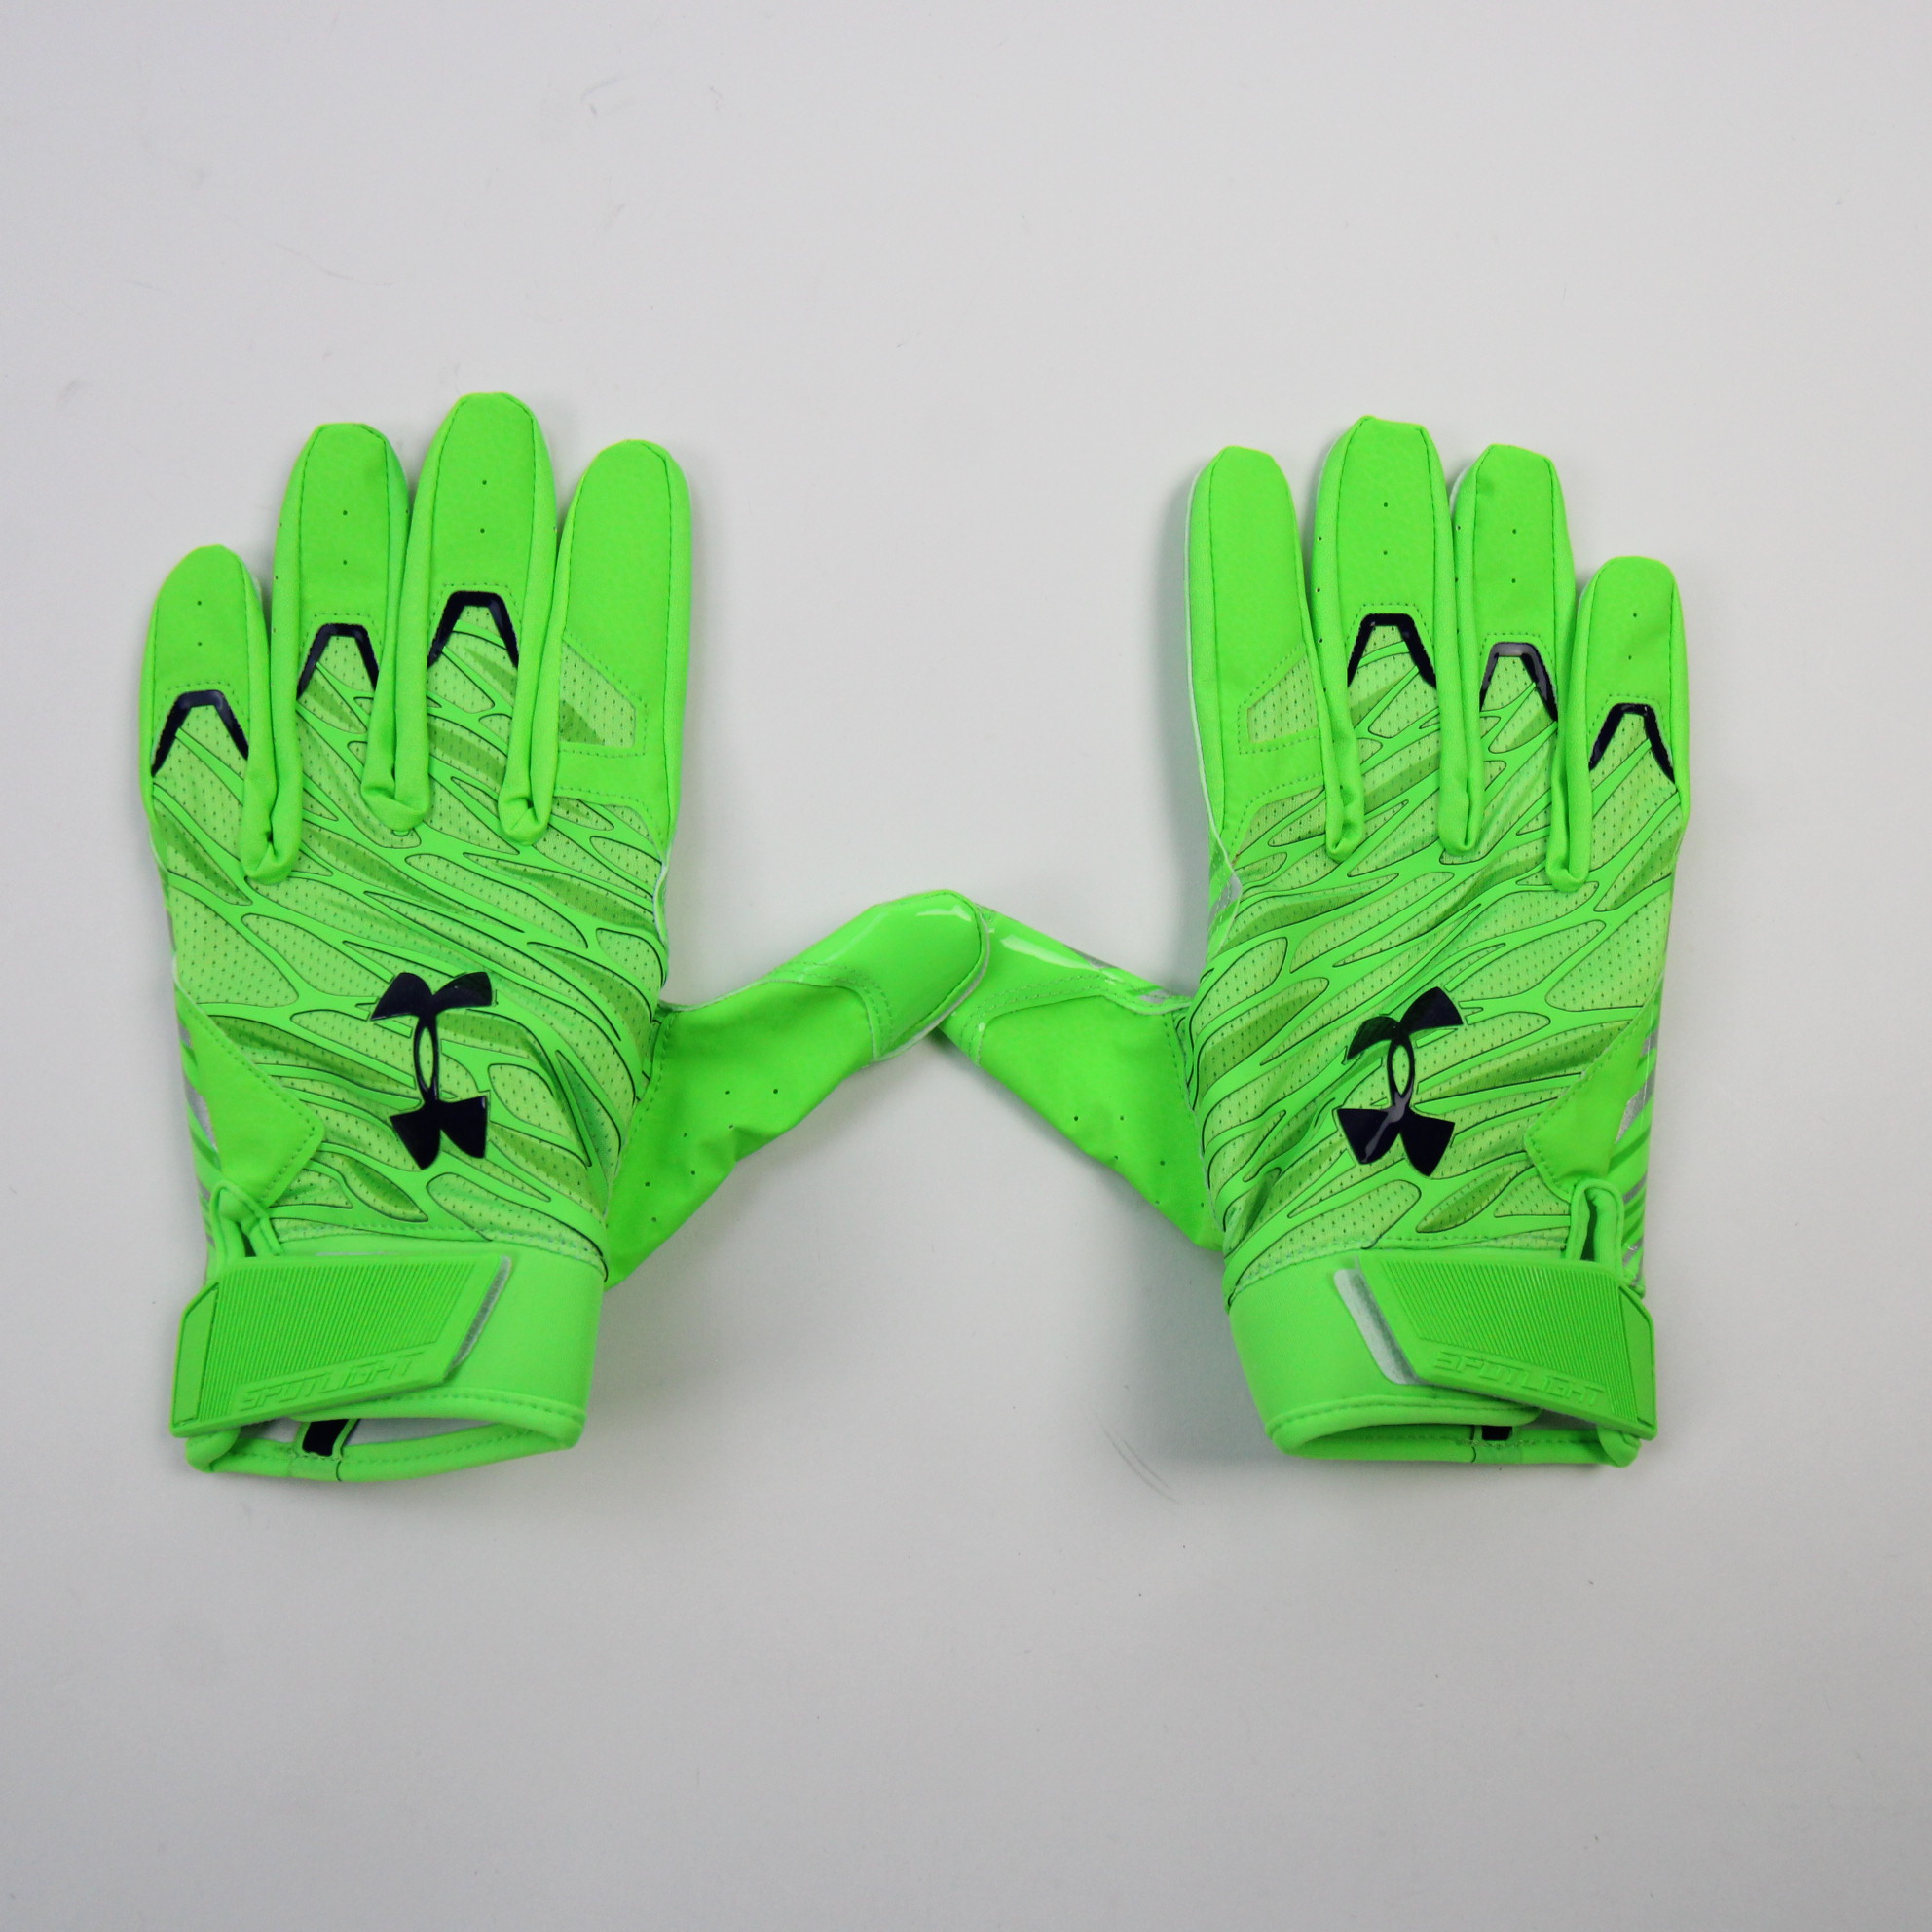 Under Gloves - Receiver Lime Green New with | eBay